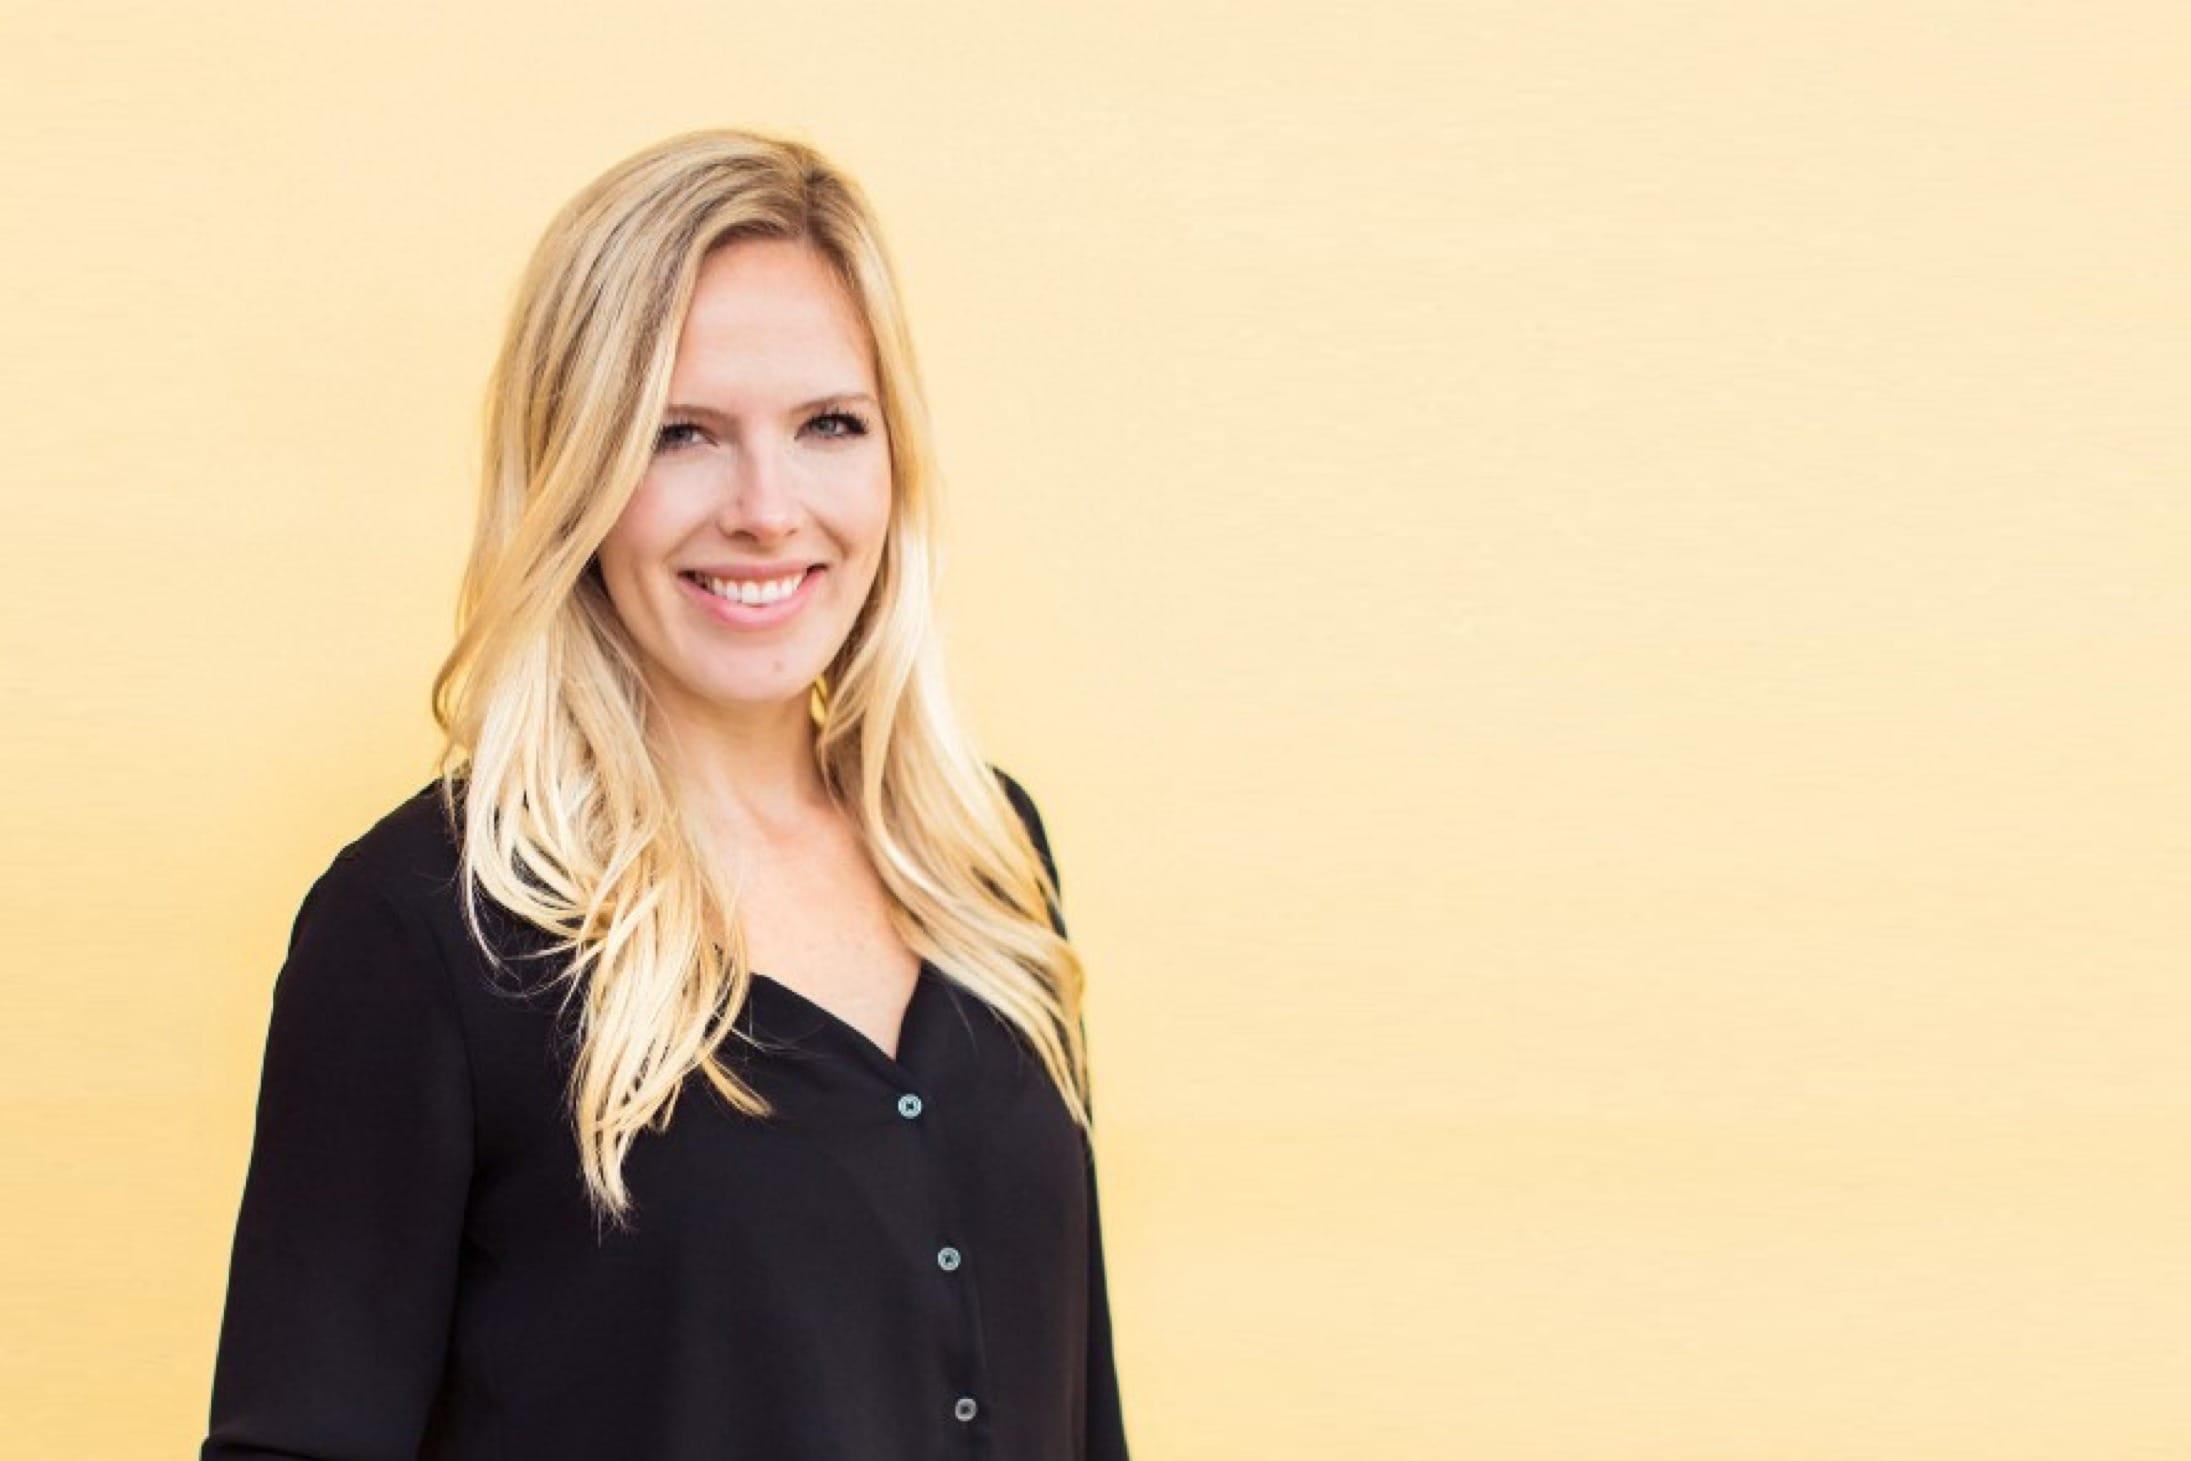 Bumble VP of Marketing Chelsea Maclin on Networking and How to Make the Most of Bumble Bizz